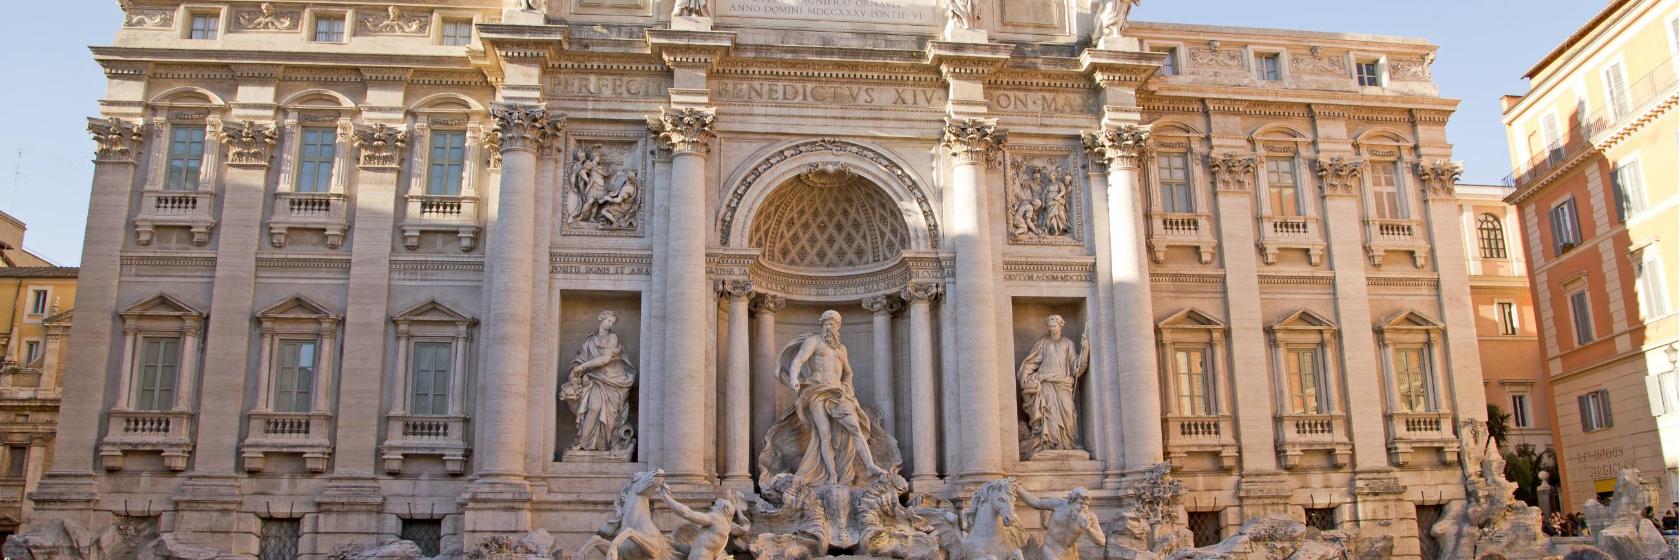 The 10 best hotels near Trevi Fountain in Rome, Italy